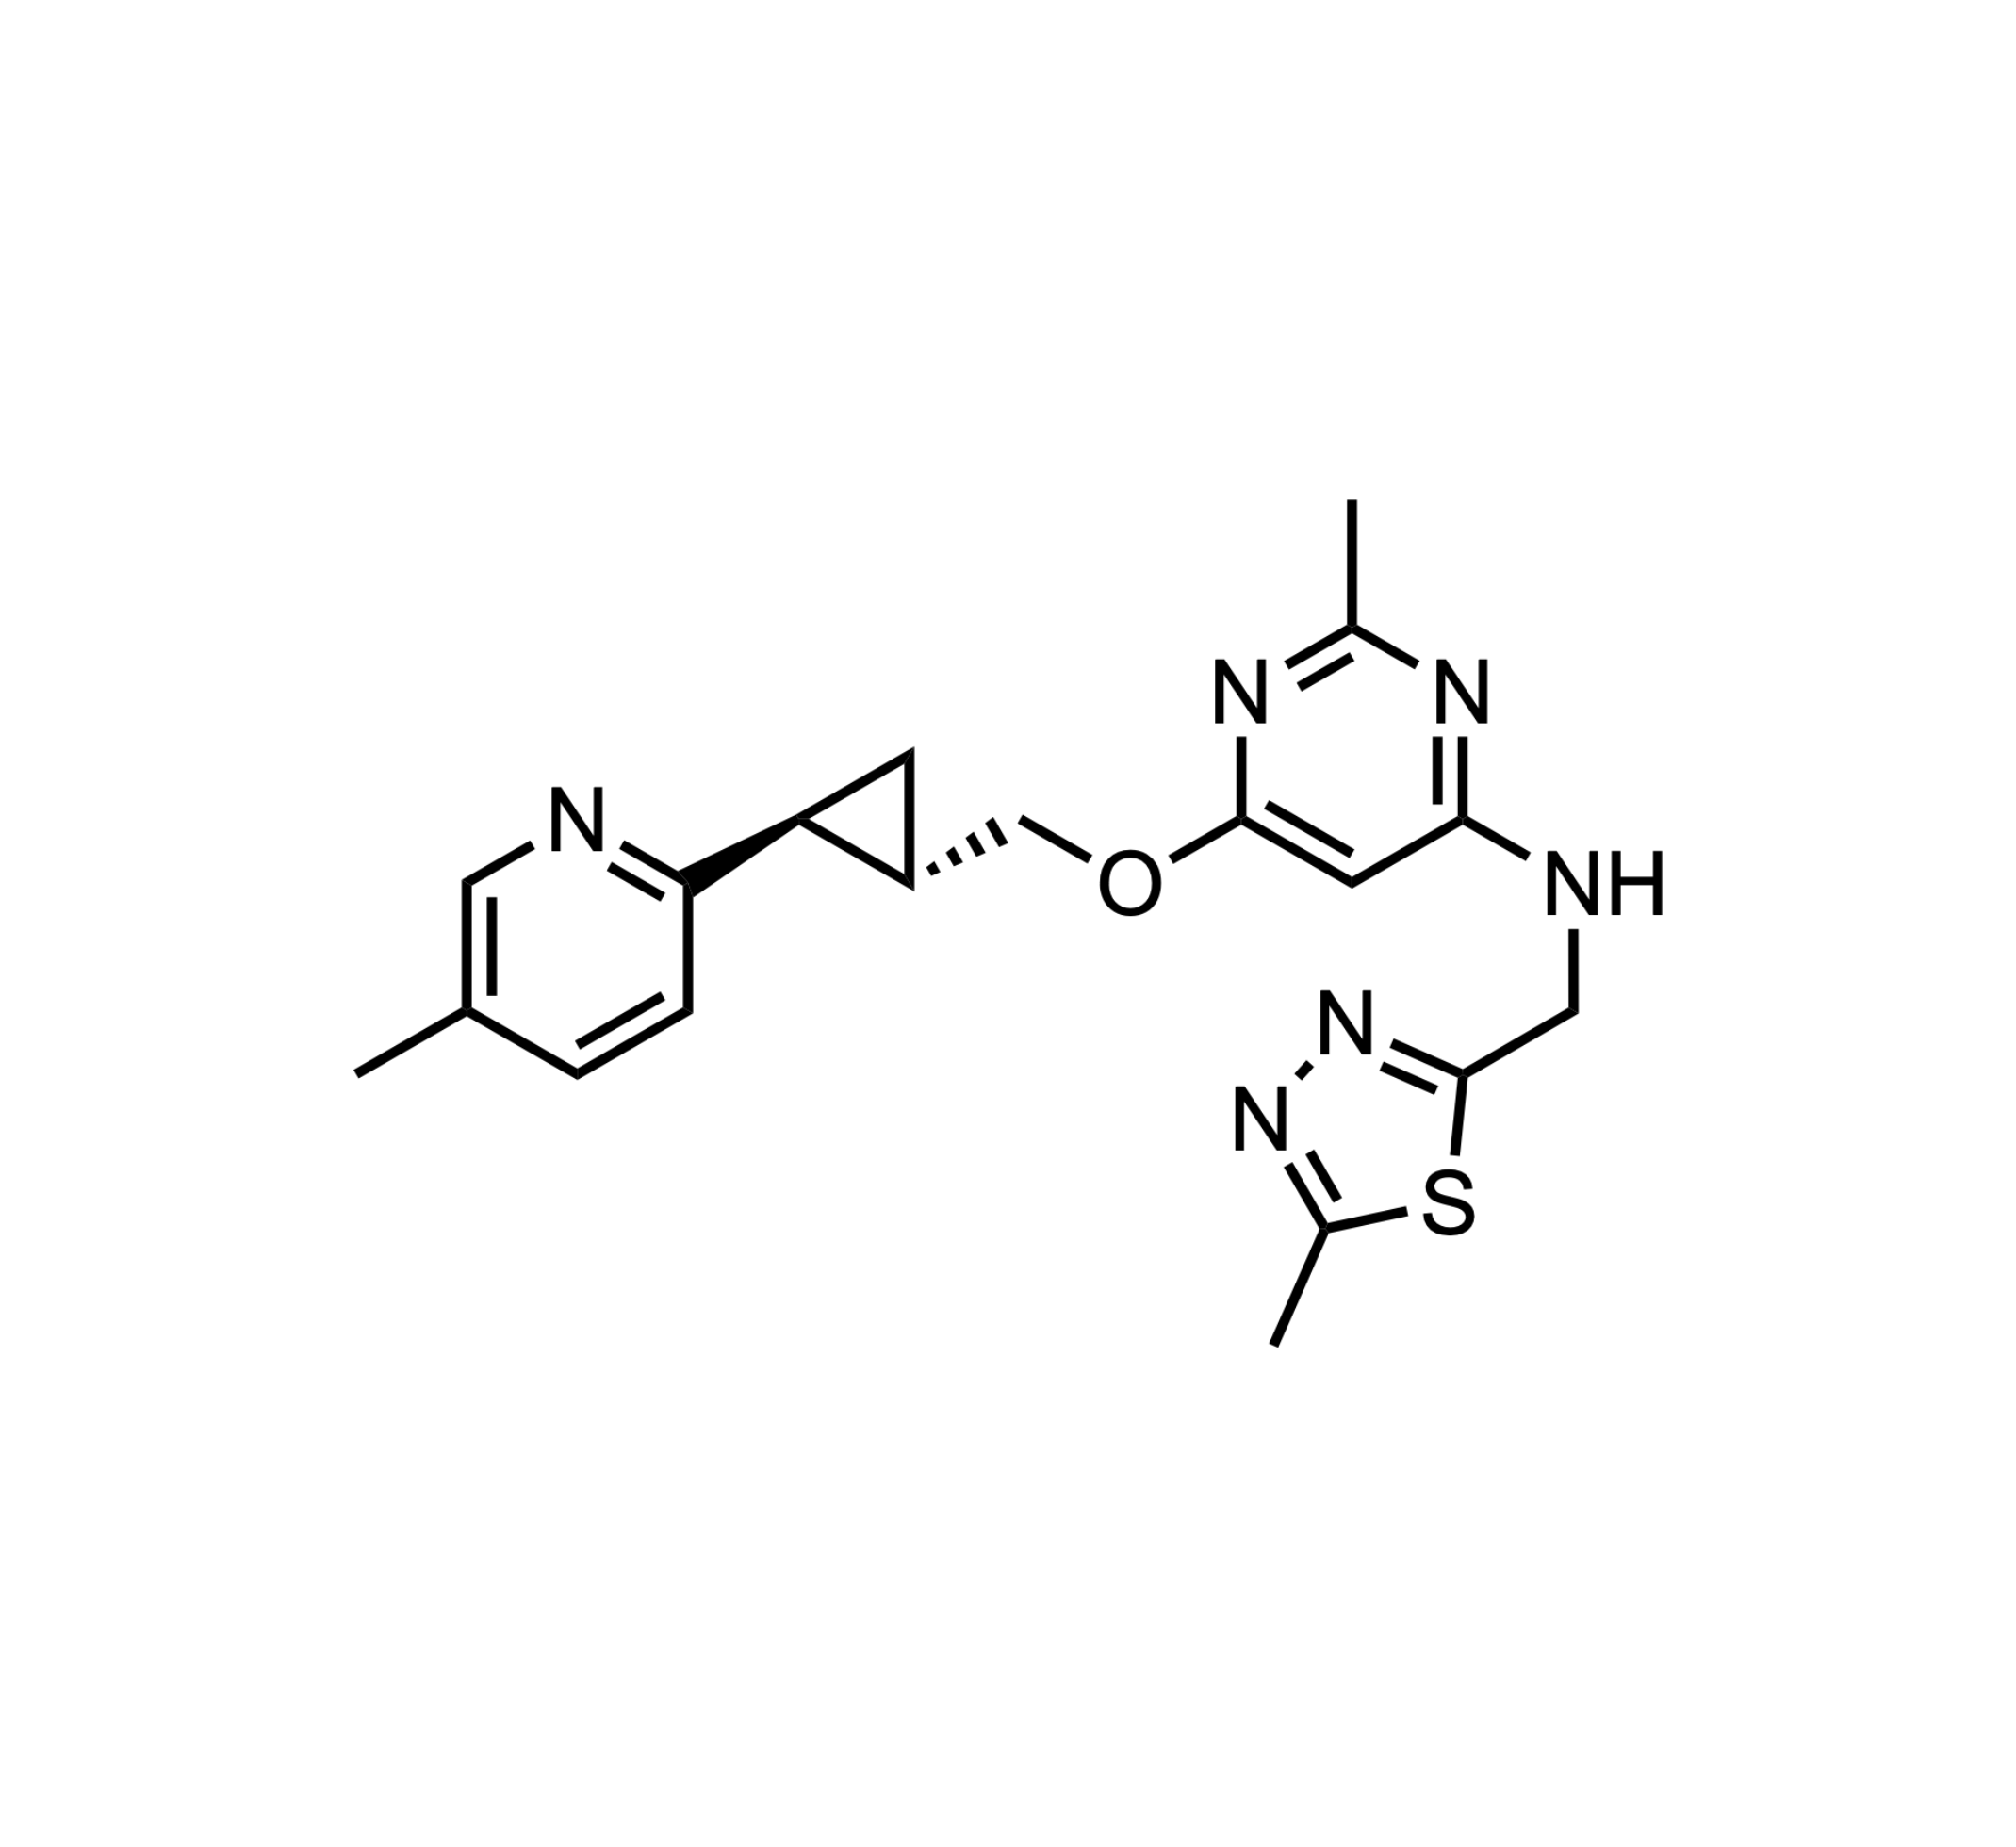 MK-8189 chemical structure oral PDE10A inhibitor - Merck, West Point, PA||||||||||||